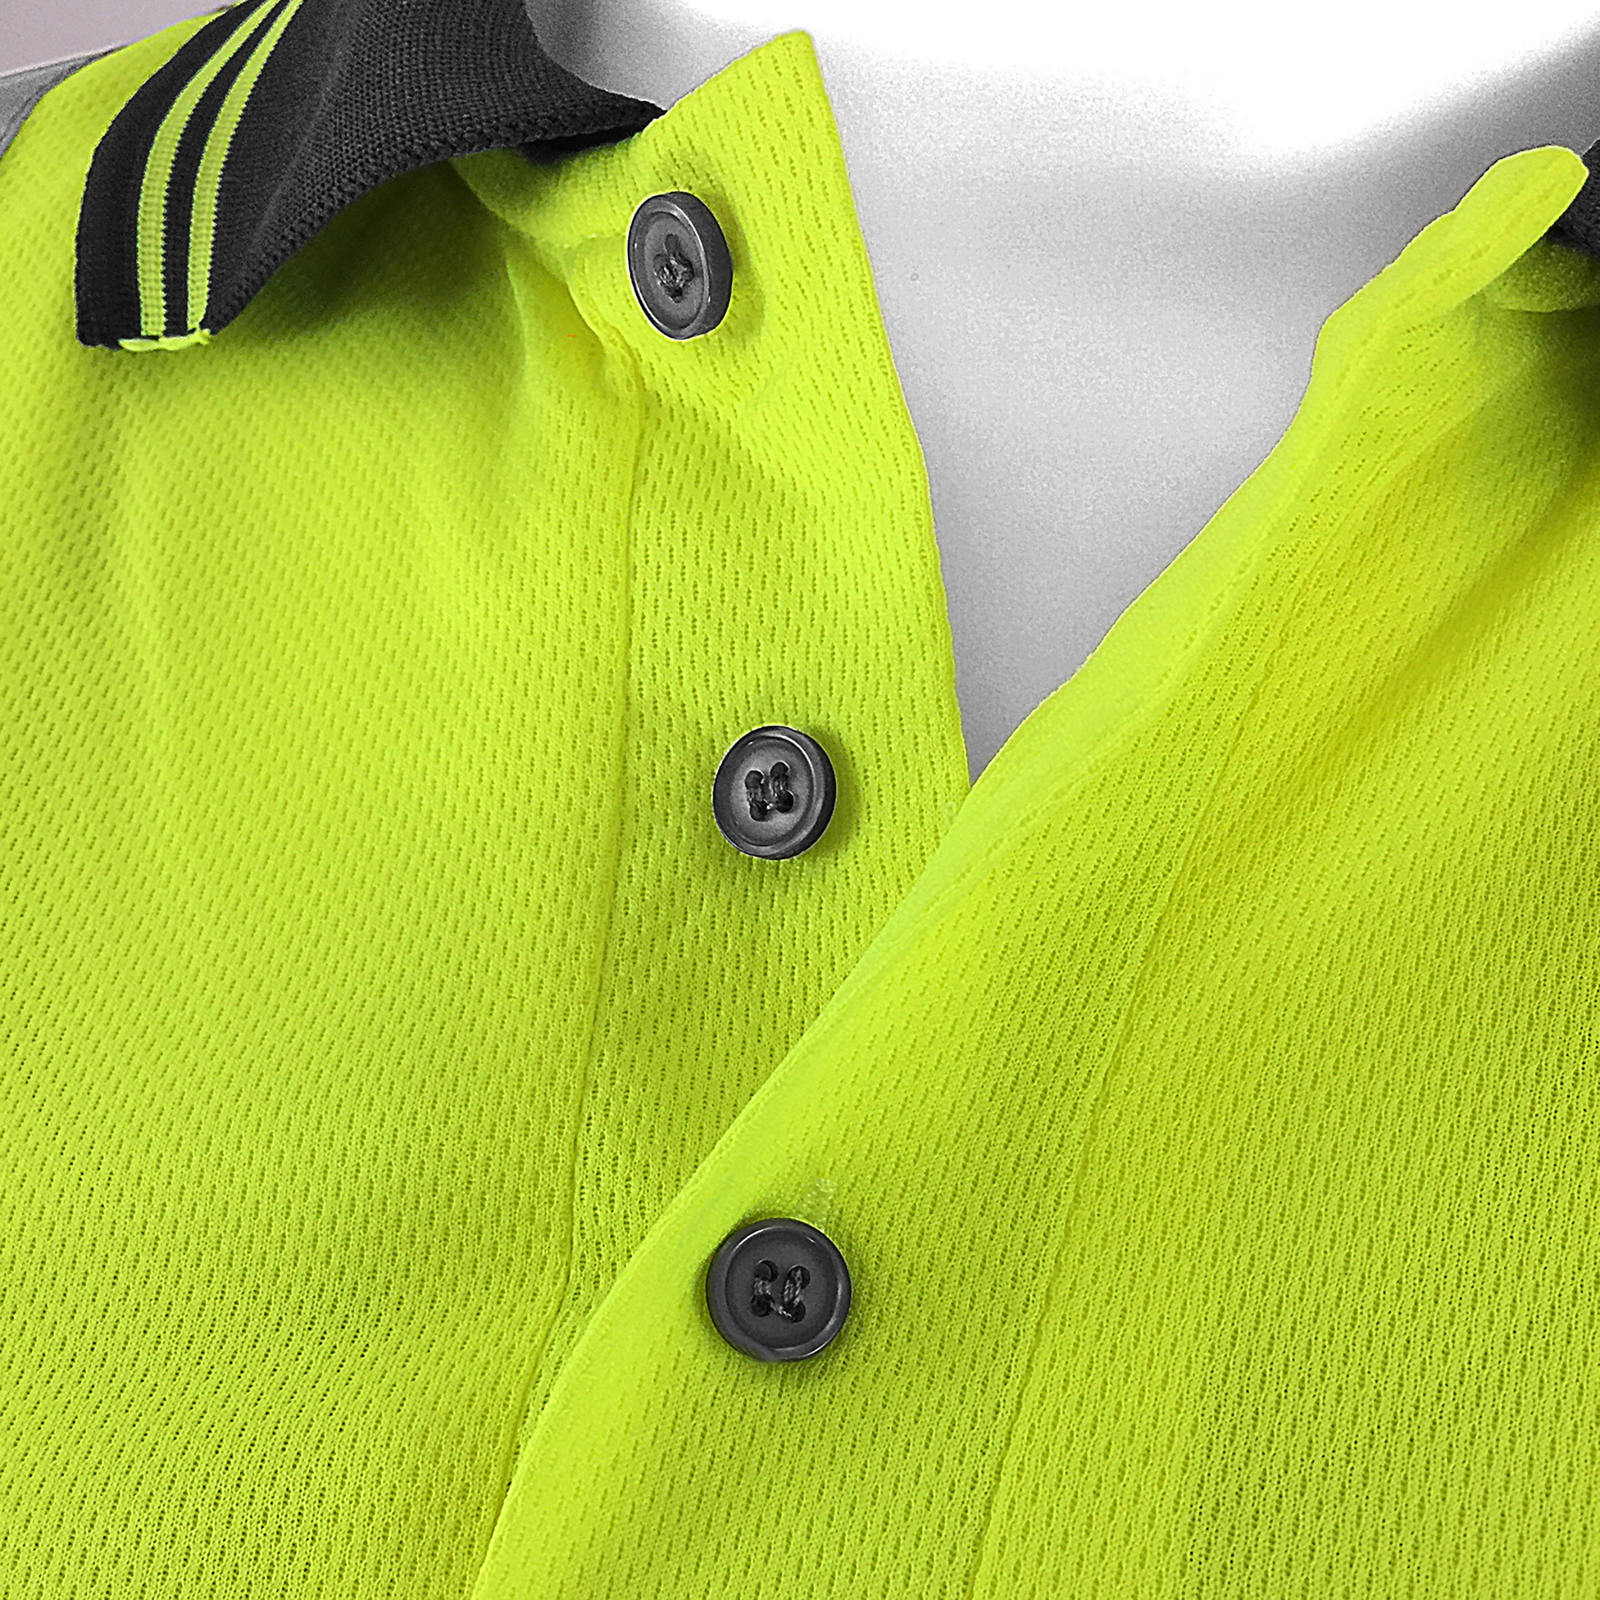 High visibility safety polo shirts with buttons